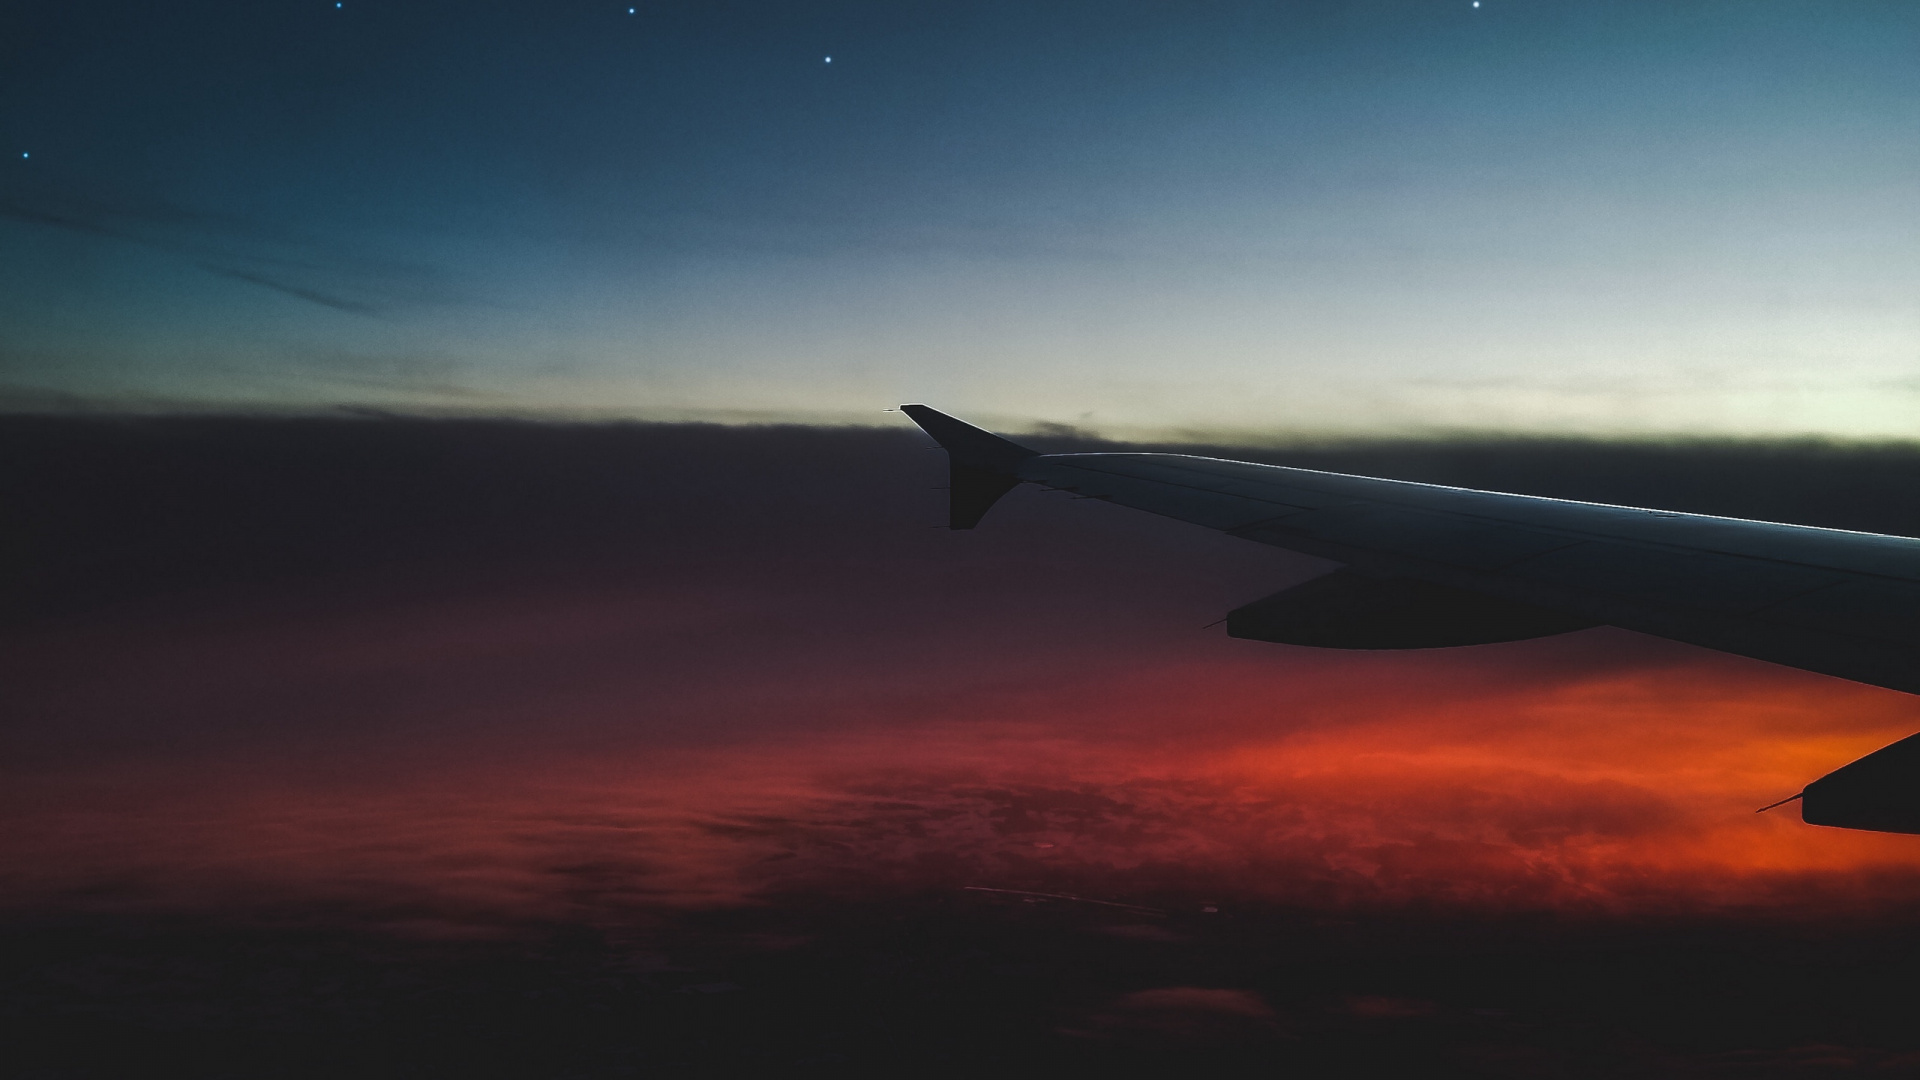 Airplane Wing Over The Clouds During Sunset. Wallpaper in 1920x1080 Resolution